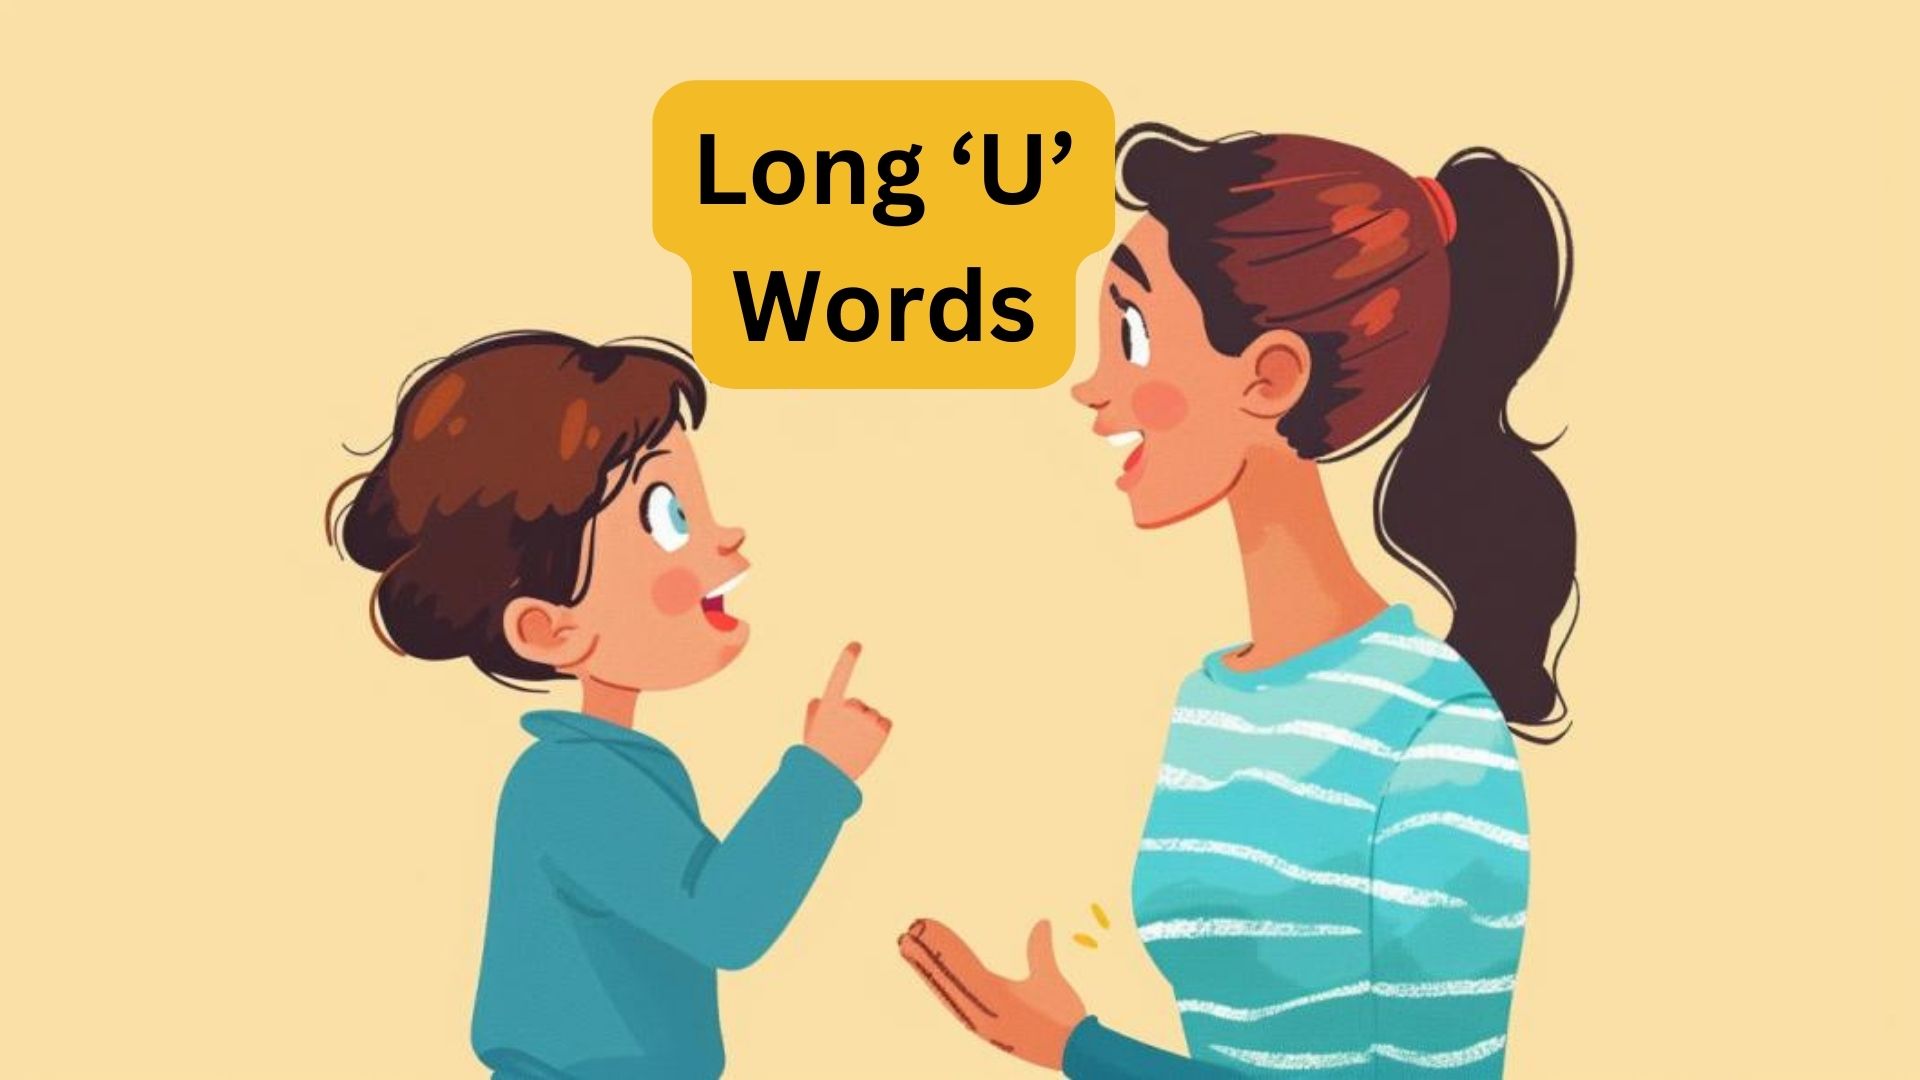 Are you struggling to pronounce long U words correctly? Many English learners find words like "tune," "cube," and "flute" challenging. But what if mastering these words could dramatically improve your overall English pronunciation and help you speak more clearly and confidently? In this blog post, we'll explore the different sounds and spelling patterns of long U words. You'll learn practical tips and exercises to perfect your pronunciation of these challenging words. Get ready to take your English speaking skills to the next level! Keep reading to discover the secrets to mastering long U words and enhancing your English pronunciation. With our expert guidance, you'll speak like a native in no time. What is the Long U Sound? LEARN TO READ LONG SOUND / U / with SENTENCES / PHONICS / ALPHABETS / BEGINNERS / The long U sound in English can be pronounced in two distinct ways: /yoo/ and /oo/. Understanding these pronunciation differences is key to mastering long U words and improving your overall English speaking skills. Examples of Long U Sounds 1. /yoo/ Pronunciation Examples Unicorn: "The magical unicorn danced in the meadow." Music: "Listening to music helps me relax." Cute: "The kitten is so cute and playful." 2. /oo/ Pronunciation Examples Moon: "The moon shone brightly in the night sky." Glue: "I need some glue to fix this broken vase." Soup: "A warm bowl of soup is perfect on a chilly day." Tips for Long U Pronunciations Mastering the pronunciations of /yoo/ and /oo/ is essential for clear and effective communication in English. Tips for Pronouncing /yoo/ 1. Start with a 'y' Sound Explanation: To pronounce /yoo/, combine a consonantal 'y' sound followed by an 'oo' sound. Example: The word "you" in "unicorn" (/ˈyo͞onəˌkôrn/) demonstrates this combination. Practice: Repeat words starting with "you," like "youth," "use," and "uniform," to reinforce the /yoo/ pronunciation. 2. Open Syllables Explanation: When the letter 'u' appears in an open syllable (ending with a vowel), it usually sounds like /yoo/. Examples: Words like unit (/ˈyo͞onit/) and music (/ˈmyo͞ozik/) showcase this pattern. Practice: Identify and pronounce more open syllable words such as "utility," "unique," and "unicorn" to solidify your understanding. 3. Silent 'e' Pattern Explanation: When 'u' is followed by a consonant and a silent 'e', pronounce it as /yoo/. Examples: Cube (/kyo͞ob/) and mute (/myo͞ot/) are prime examples of this pattern. Practice: Focus on words with the silent 'e' pattern, like "fuse," "mule," and "huge," to master this pronunciation rule. Tips for Pronouncing /oo/ 1. Rounded Lips Explanation: To pronounce /oo/, shape your lips into a rounded position, as if saying "too." Examples: Moon (/mo͞on/) and food (/fo͞od/) require this rounded lip shape for accurate pronunciation. Practice: Emphasize the rounded lip shape while pronouncing words like "school," "soon," and "boot" to master the /oo/ sound. 2. Silent 'e' Pattern Explanation: The 'u-e' spelling can also produce the /oo/ sound, similar to the /yoo/ pronunciation. Examples: Flute (/flo͞ot/) and tube (/tyo͞ob/) demonstrate this pattern. Practice: List and practice words like "rude," "rule," and "tune" to reinforce the /oo/ pronunciation with the silent 'e.' Practice Strategies for Pronouncing Long U Sounds Consistent practice is essential for mastering the pronunciation of long U sounds. 1. Using Color-Coded Letters Explanation: Differentiating spelling patterns using colors can visually reinforce your learning and help you quickly identify and remember the various patterns associated with long U sounds. Implementation: Assign specific colors to each spelling pattern to create a visual association. Example: Use blue for 'ue' words like "glue" and green for 'ew' words like "stew." Practice: Create word lists or flashcards using the color-coded letters and practice regularly to strengthen your visual memory and recognition of these patterns. Benefits: Color-coding helps quickly identify and remember different spelling patterns, making it easier to associate the correct pronunciation with each word. 2. Breaking Down Words Explanation: Sound blending involves dividing words into individual sounds (phonemes) and then blending them together to form the complete word. This technique helps you focus on each sound and better understand how they combine to create the long U pronunciation. Implementation: Practice breaking down long U words into their sounds and then blending them. Example: For the word "music," break it down into "m-u-s-i-c" and then blend the sounds to form "music." Practice: Use this technique with various long U words to reinforce their pronunciation and develop your phonemic awareness. Benefits: Sound blending enhances your phonemic awareness and helps you understand the structure of words, making it easier to pronounce them accurately. 3. Using Magnetic Letters or Air Tracing Explanation: Engaging in physical activities that involve forming or tracing letters can help reinforce your learning and make it more interactive and enjoyable. Implementation: Use magnetic letters to form long U words or trace the letters in the air while pronouncing them. Example: Form the word "cube" with magnetic letters or trace it in the air as you say it. Practice: Incorporate these kinesthetic activities into your daily learning sessions to provide hands-on practice and engage your sense of touch and movement. Benefits: Kinesthetic activities engage learners who learn best through movement and touch, making learning more interactive and fun. 4. Listening to Recordings Explanation: Listening to and mimicking correct pronunciations can improve your pronunciation of long U sounds. Implementation: Use online dictionaries with audio examples, such as Merriam-Webster, to listen to and repeat long U words. Example: Look up words like "music" and "moon" in the dictionary and practice saying them along with the recordings. Practice: Set aside dedicated time each day to listen to and practice pronouncing long U words, focusing on mimicking the correct sounds. Benefits: Listening exercises help you develop an ear for correct pronunciation and familiarize yourself with the subtle nuances of long U sounds. 5. Using Apps for Guided Practice Explanation: Educational apps offer interactive pronunciation exercises that can guide you through structured practice sessions and provide immediate feedback on your performance. Implementation: Use apps like "Sounds: The Pronunciation App" for guided practice sessions focused on long U sounds. Example: Follow the app's exercises to practice pronouncing long U words and receive feedback on your accuracy. Practice: Regularly use these apps as part of your study routine to reinforce your learning and track your progress over time. Benefits: Interactive tools provide structured and varied practice opportunities, allowing you to focus on specific aspects of long U pronunciation and receive immediate feedback. Common Mistakes and How to Avoid Them Recognizing and addressing common mistakes in pronouncing long U sounds is crucial for accurate communication. This section will highlight typical errors and provide strategies for avoiding them, enhancing your English speaking skills. Mispronouncing Open Syllables 1. Understanding the Rule In open syllables (ending with a vowel), the 'u' usually produces the /yoo/ sound. Correctly pronouncing open syllables is essential for clear speech and comprehension. 2. Examples Unit: Pronounced as /ˈyo͞onit/. Music: Pronounced as /ˈmyo͞ozik/. Confusing U and U-E Patterns 1. Understanding the Difference U Pattern: Produces a short 'u' sound as in "cub." U-E Pattern: Produces the /yoo/ sound due to the silent 'e,' as in "cube." 2. Examples Cub: Pronounced as /kʌb/. Cube: Pronounced as /kyo͞ob/. Mixing up EW and UE 1. Understanding the Confusion EW Pattern: Can produce both /yoo/ and /oo/ sounds. UE Pattern: Often produces the /oo/ sound but can also produce /yoo/. 2. Examples EW: Curfew (/ˈkərfyo͞o/), stew (/styo͞o/). UE: Argue (/ˈärɡyo͞o/), glue (/ɡlo͞o/). Overgeneralizing OO Spelling 1. Understanding the Rule Overusing 'oo' spelling for the /oo/ sound in inappropriate contexts. 2. Examples Incorrect: Floo (correct: flu). Correct: Moon, pool. Exceptions and Rule Breakers 1. Understanding Exceptions Some words do not follow the standard pronunciation rules for long U sounds. 2. Examples Busy: Pronounced as /ˈbɪzi/. Bury: Pronounced as /ˈberi/. Conclusion Mastering long U pronunciations is essential for clear communication and confidence in speaking English. By understanding the distinct /yoo/ and /oo/ sounds, recognizing common spelling patterns, and practicing through engaging exercises, you can significantly improve your pronunciation skills. While challenges may arise, such as mispronouncing open syllables or confusing similar spelling patterns, consistent practice, and effective strategies will help you overcome these obstacles. So, what's your next step? Start practicing today and unlock the full potential of your English pronunciation skills. Remember, with dedication and the right tools, you'll soon communicate clearly and confidently. Frequently Asked Questions How Do You Teach the Long U Sound? Teach the two long U sounds (/yoo/ and /oo/) using spelling patterns and examples, as well as practice exercises focusing on word recognition and pronunciation. What is the U Sound Rule? The long U sound is often pronounced as /yoo/ in open syllables or as /oo/ in various spelling patterns such as 'ue', 'ew', and 'oo'. How to Pronounce U Phonics? The letter 'u' can be pronounced as a long U (/yoo/ or /oo/) or a short U (/ŭ/) sound, depending on the word and spelling pattern. What is the Long U in Phonetic Transcription? Enhancing Pronunciation with Long U Words Mastery